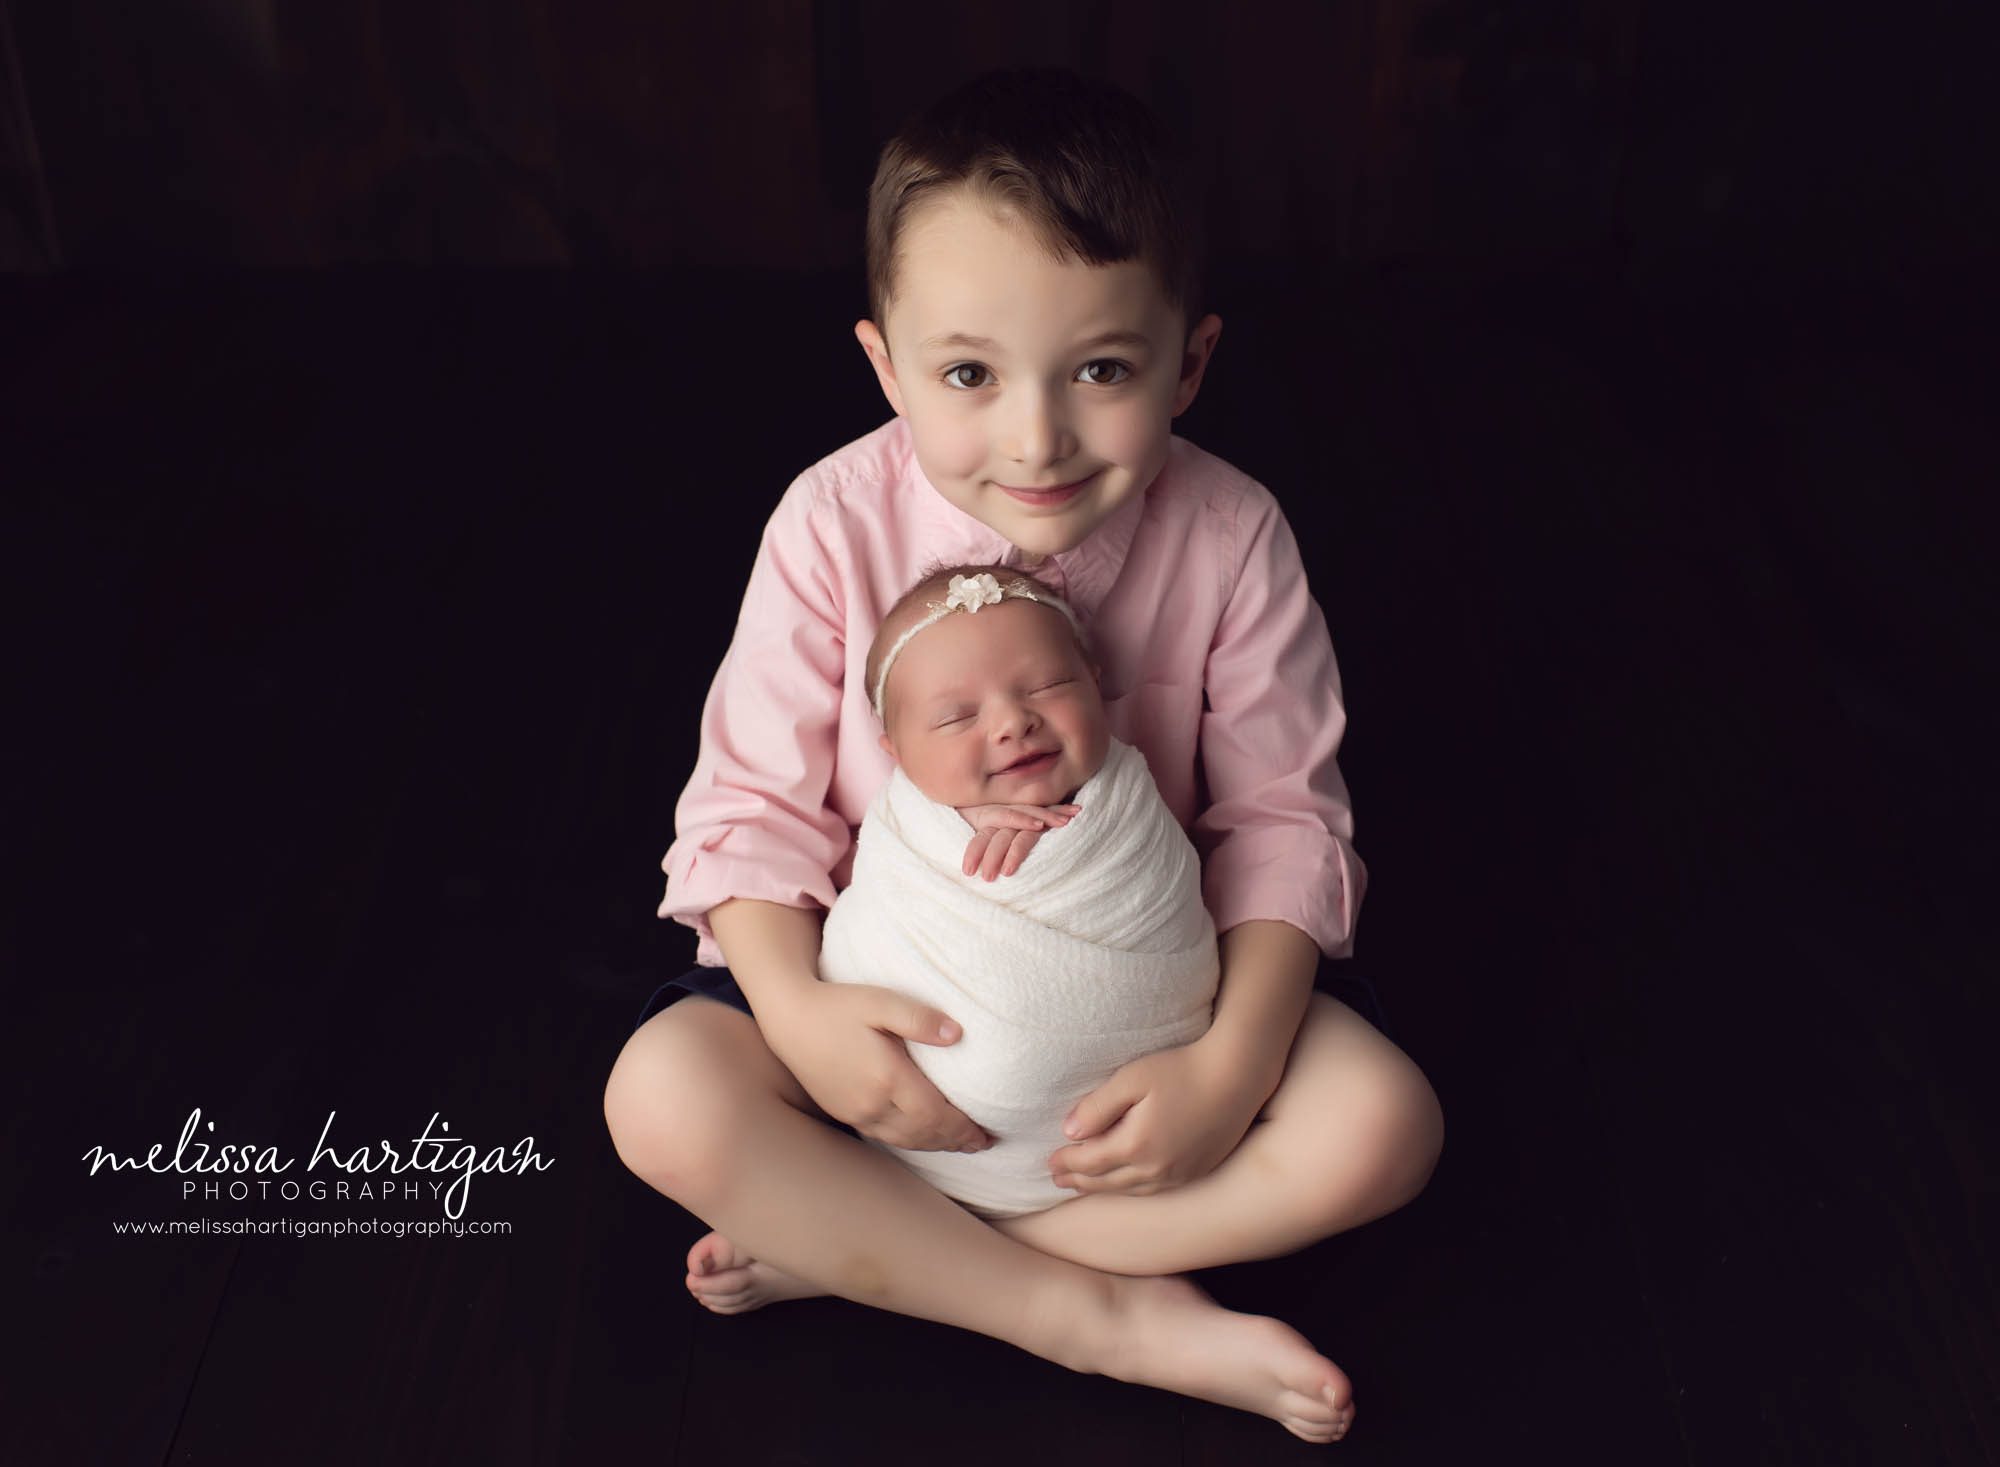 older brother sitting down holding baby sister in studio newborn photography session CT baby photographer